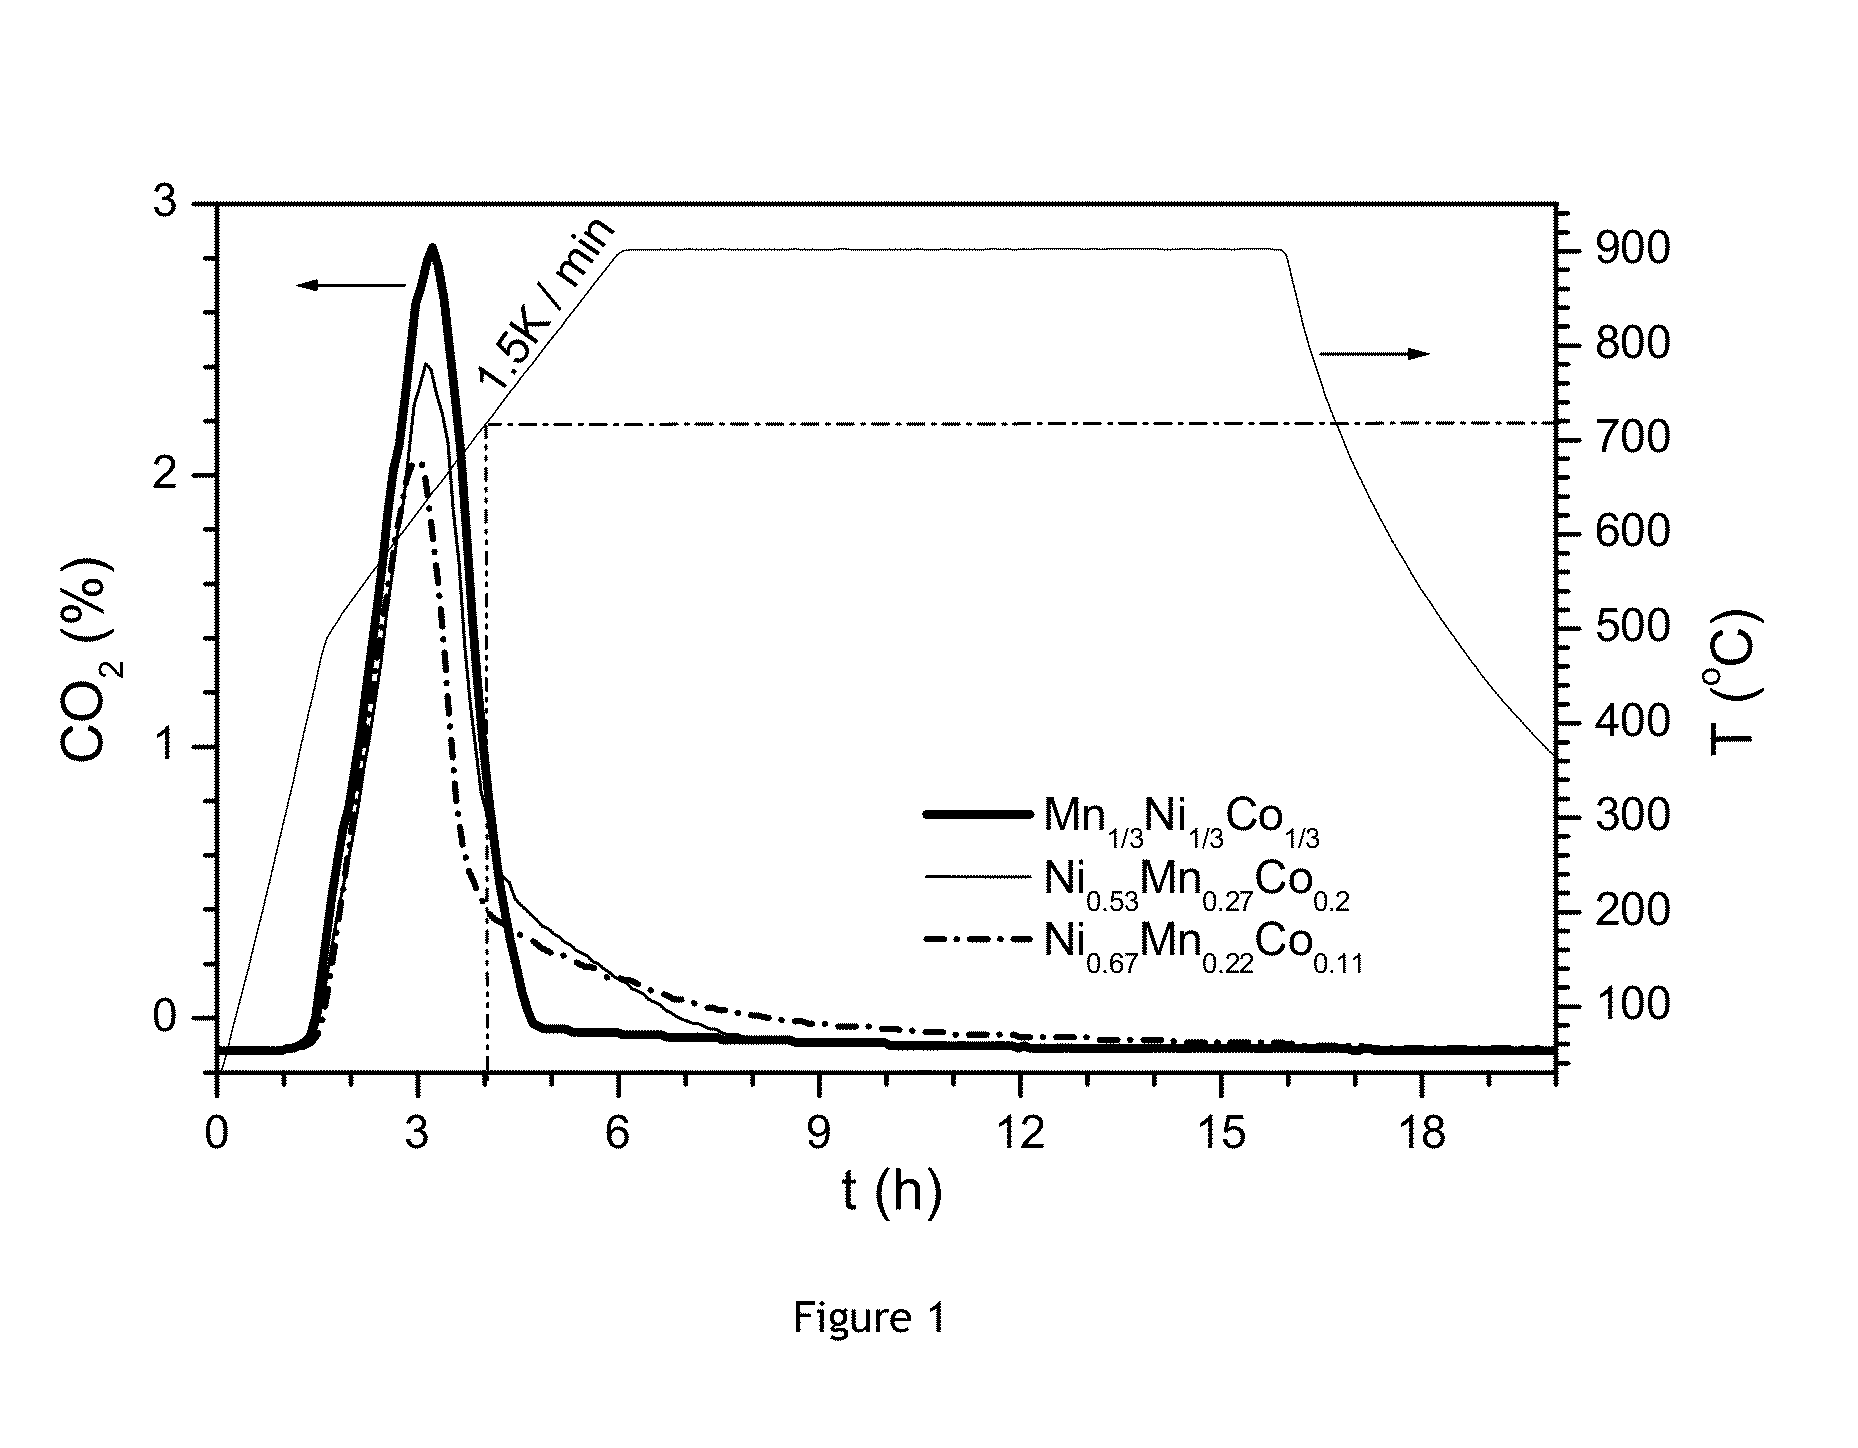 High nickel cathode material having low soluble base content